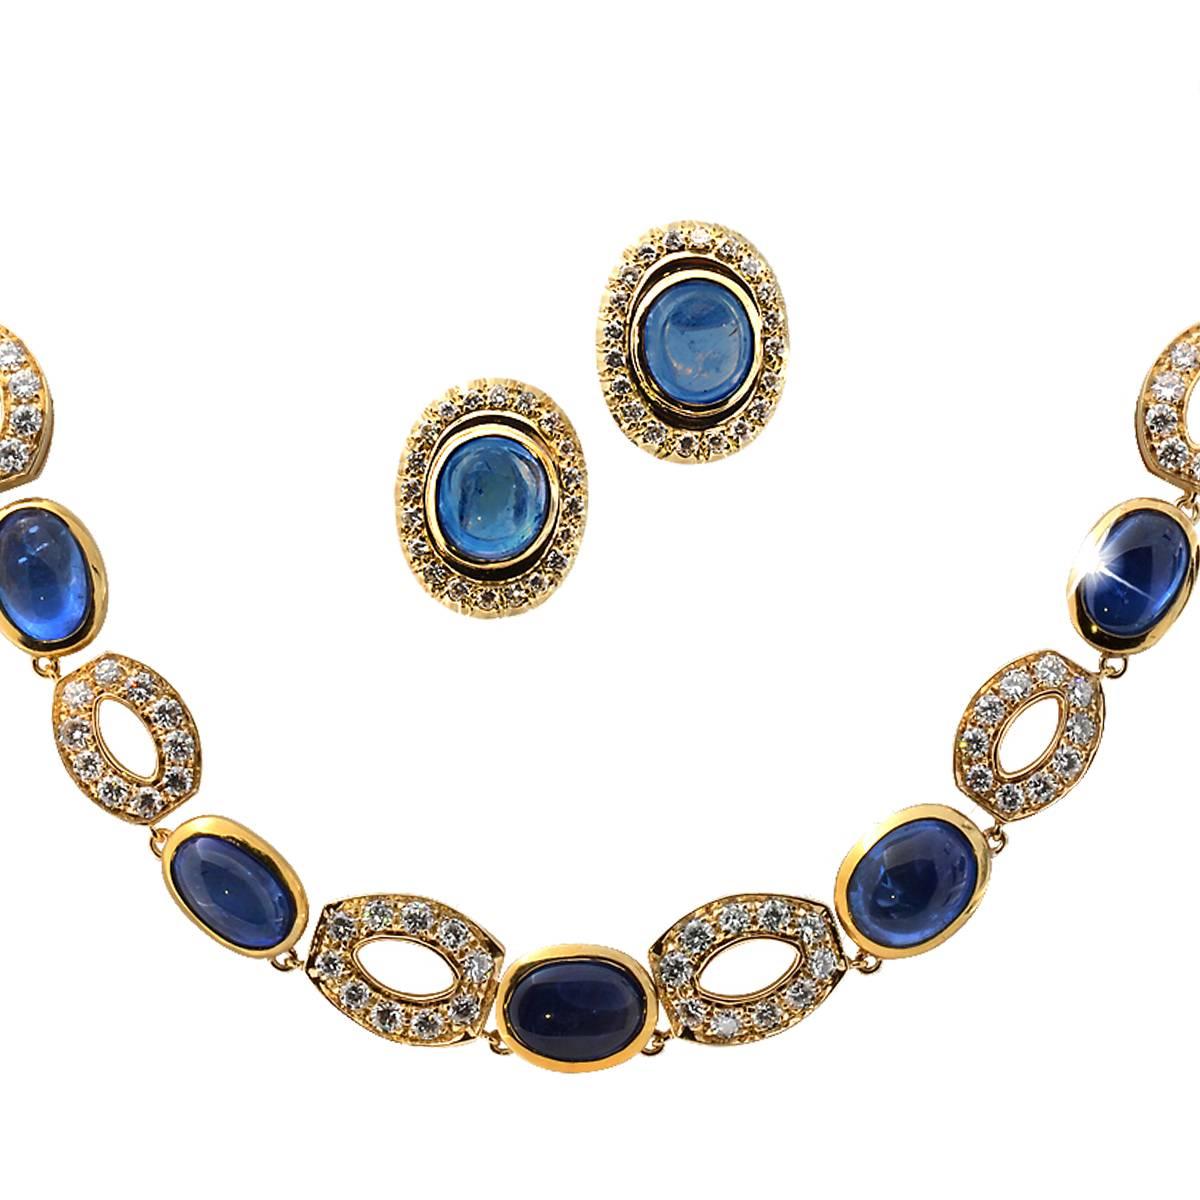 Sapphire Diamond Necklace and Earring Set with 11 Oval Cut Sapphires Weighing Approximately 37cts and 124 Round Brilliant Cut Diamonds Weighing Approximately 6cts.